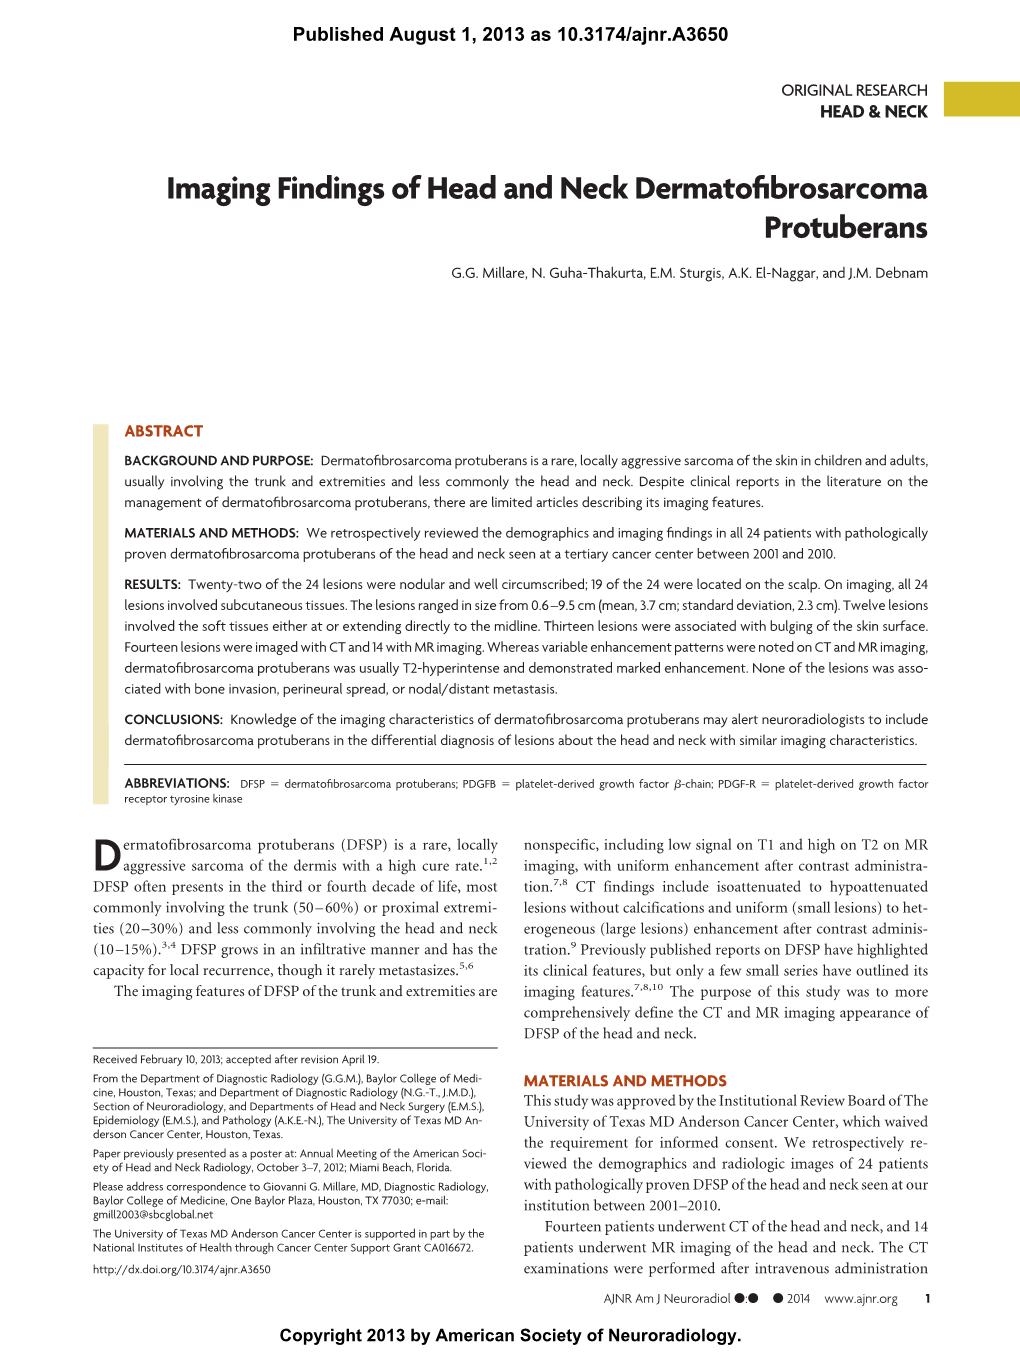 Imaging Findings of Head and Neck Dermatofibrosarcoma Protuberans